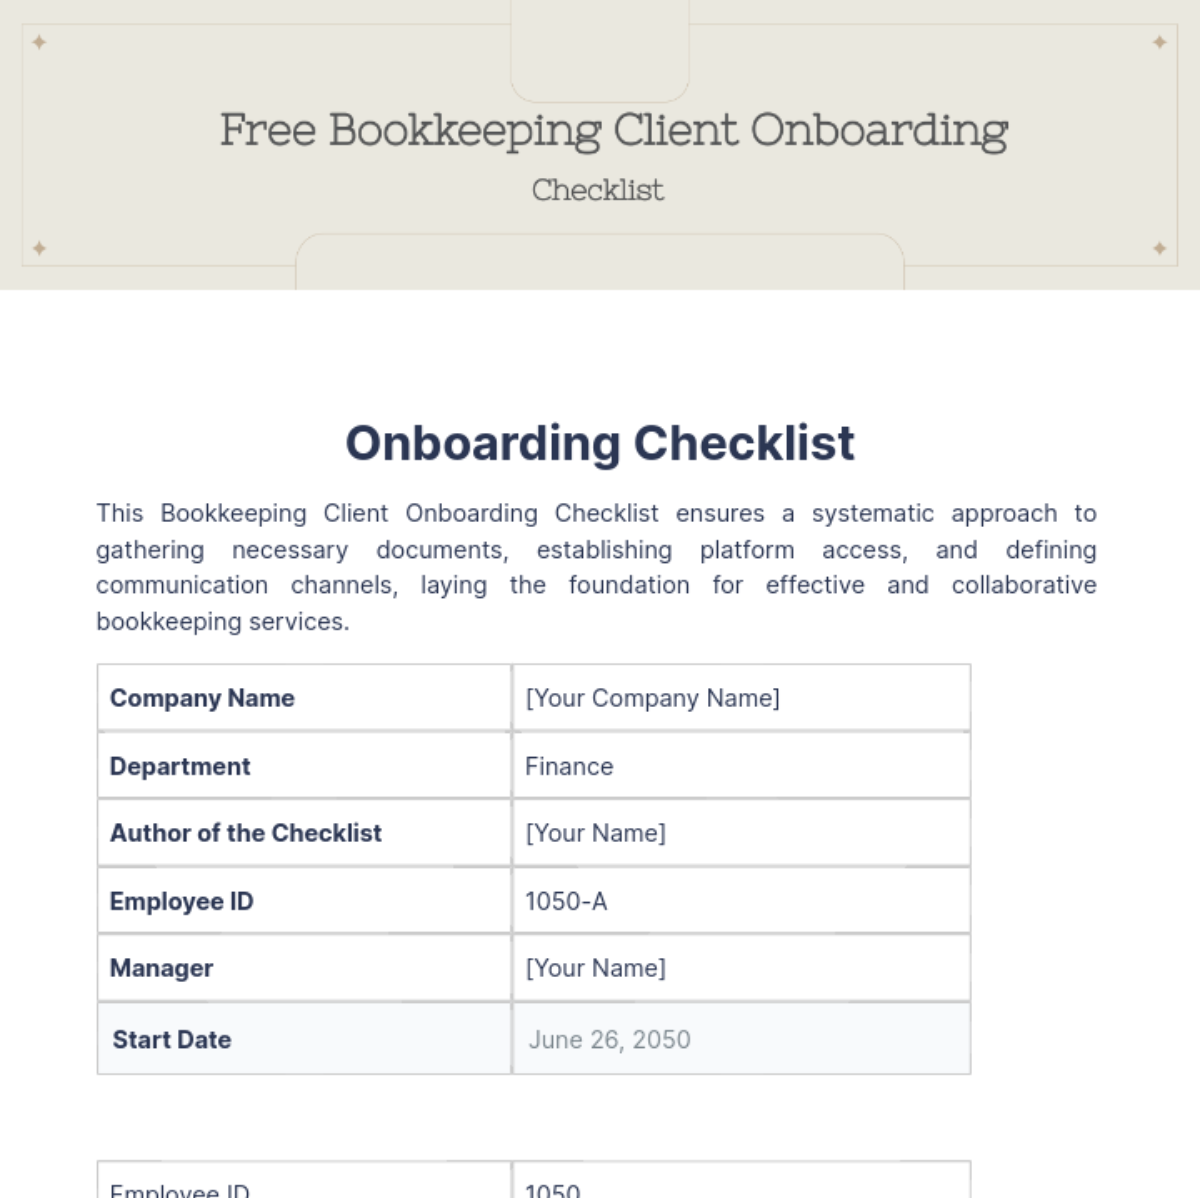 Free Bookkeeping Client Onboarding Checklist Template